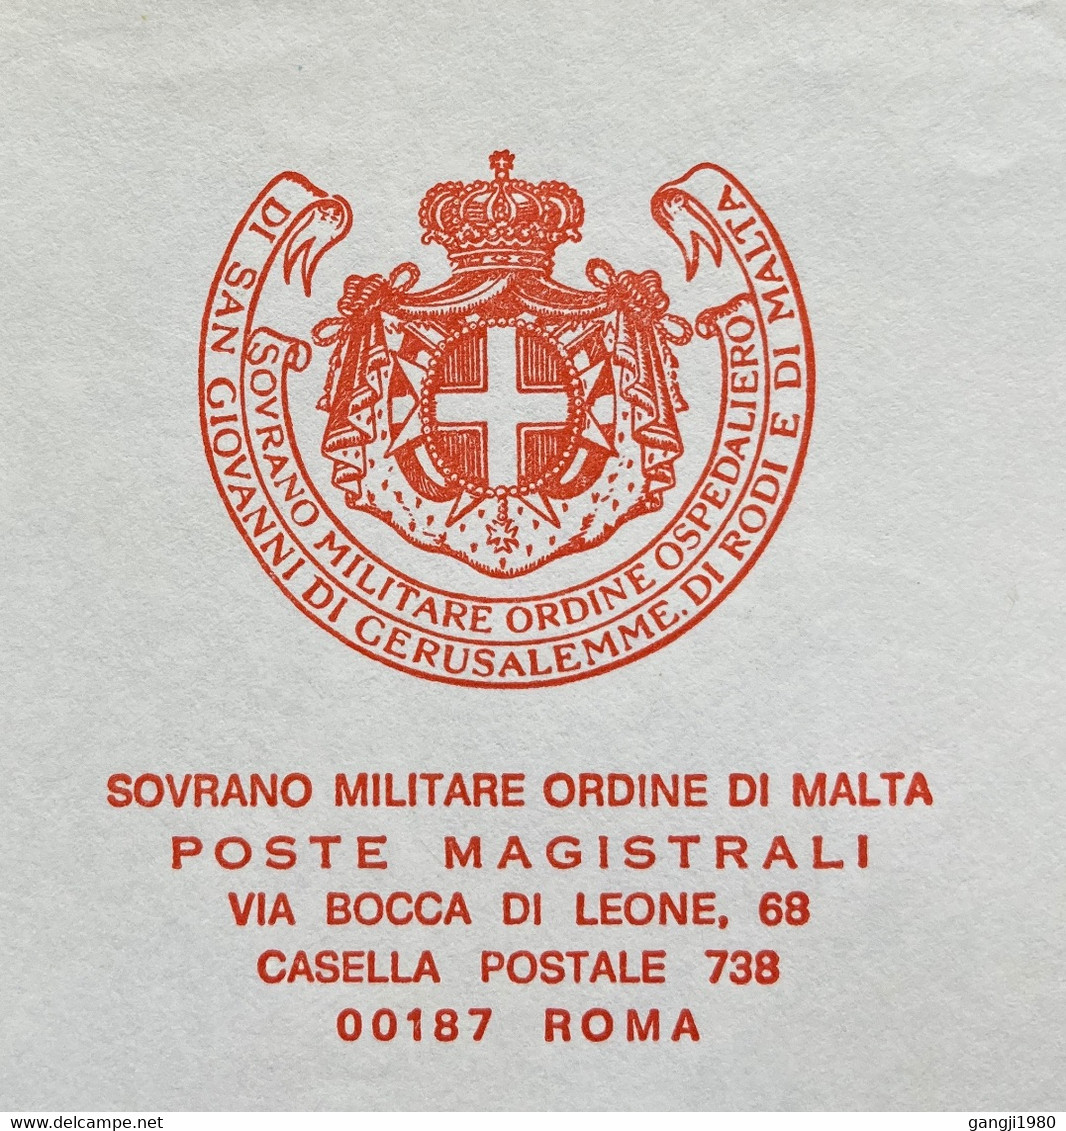 VATICAN 1995, MALTA MILITARY PRINTED COVER,4 STAMPS ,COUPLE,POPE ,CHRIST,ART ,PAINTING EXIST CHRIST SLOGAN USED COVER TO - Lettres & Documents